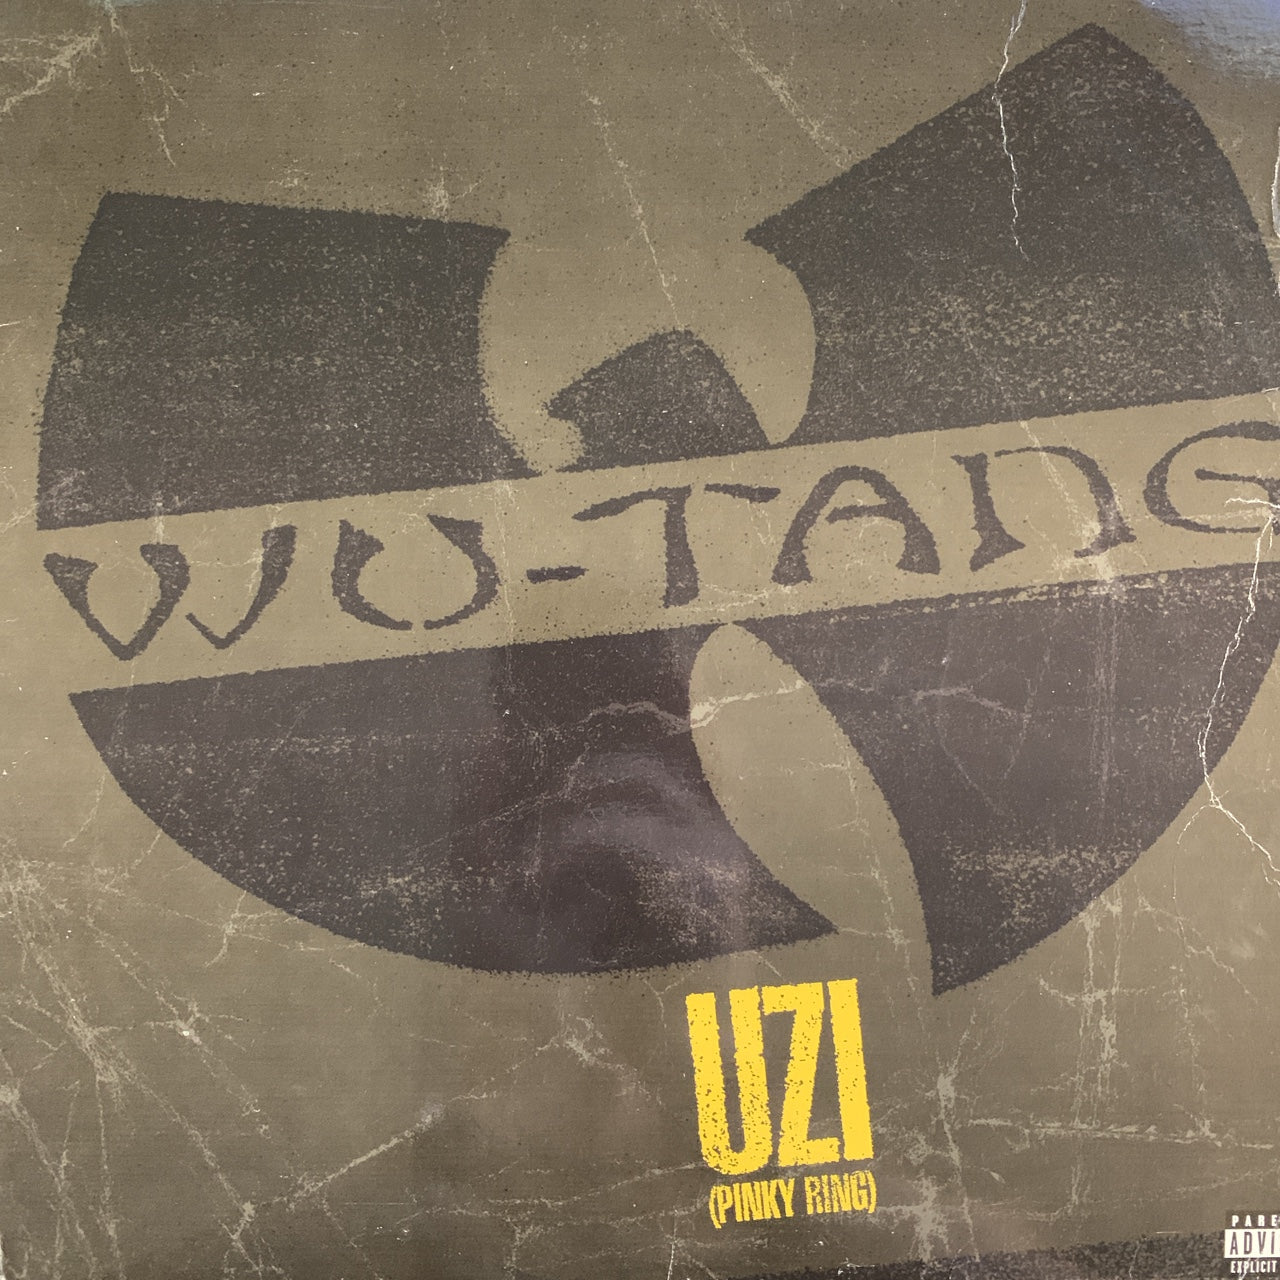 Wu-Tang Clan “Uzi (Pinky Ring)” / “Y’all Been Warned”